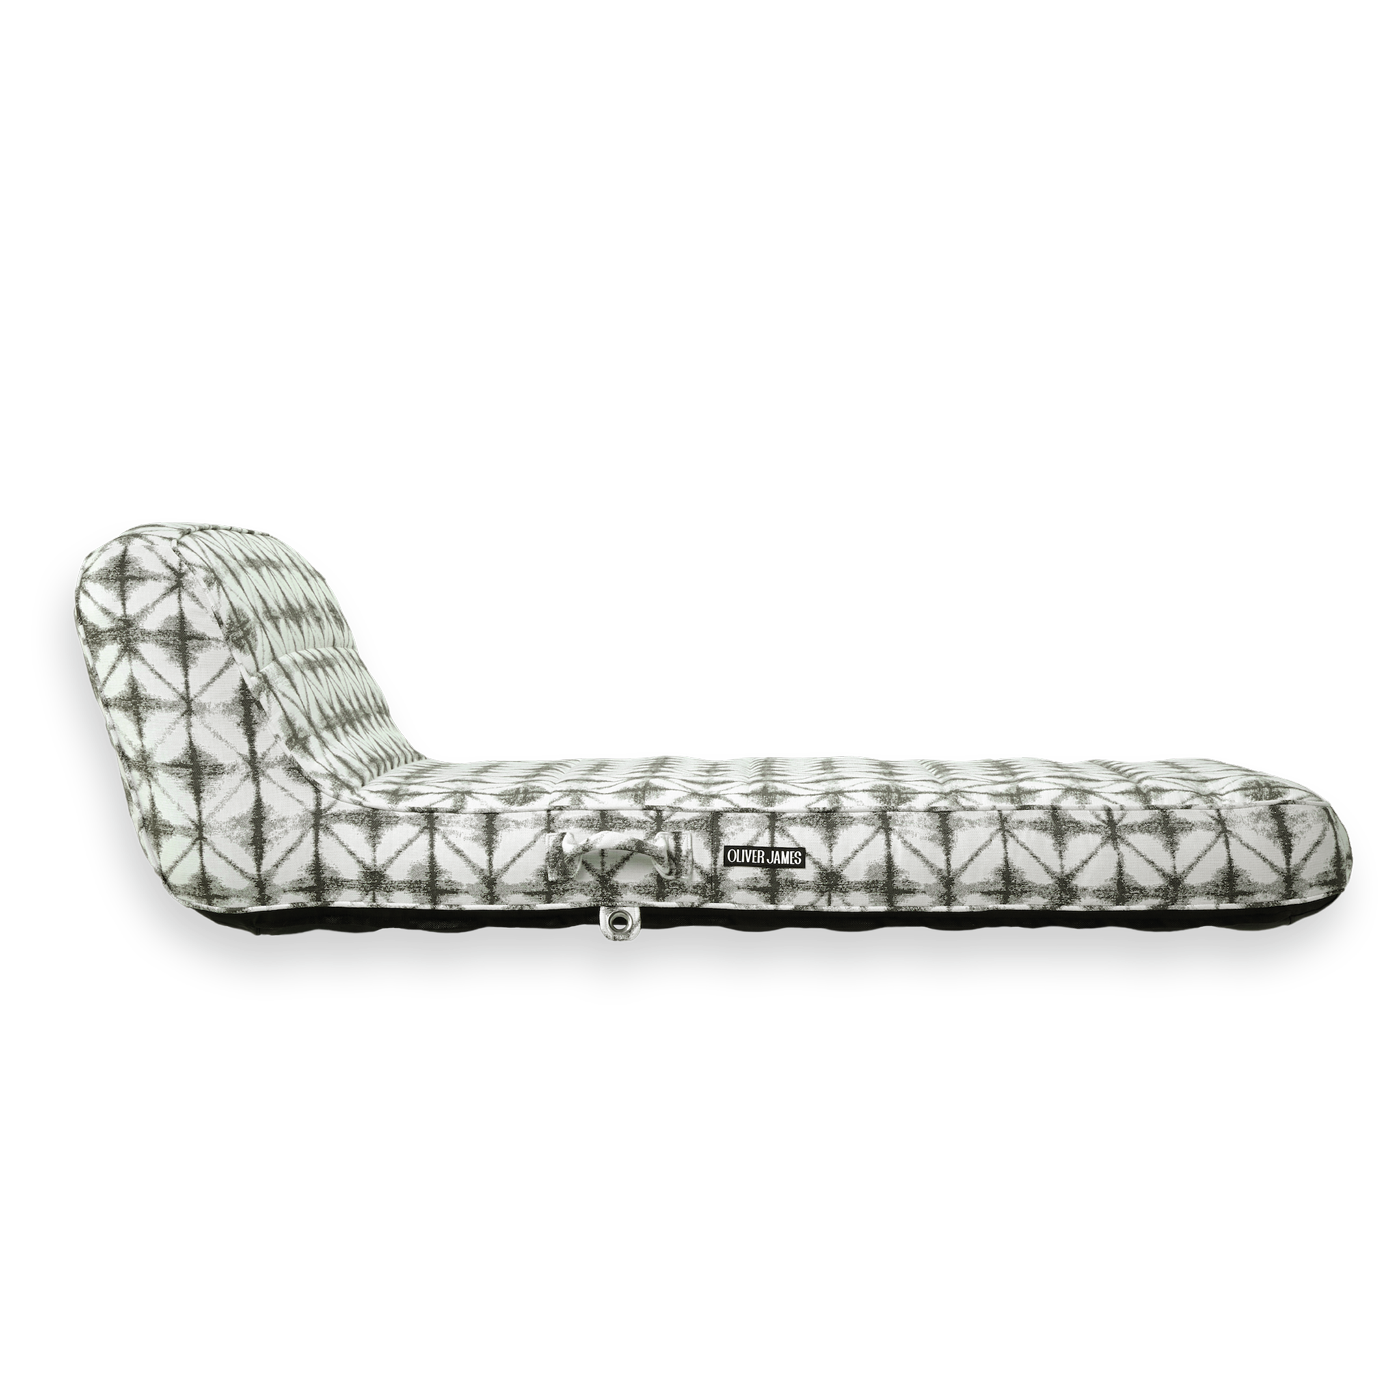 The side profile and backrest angle of a single grey and white luxury pool float.